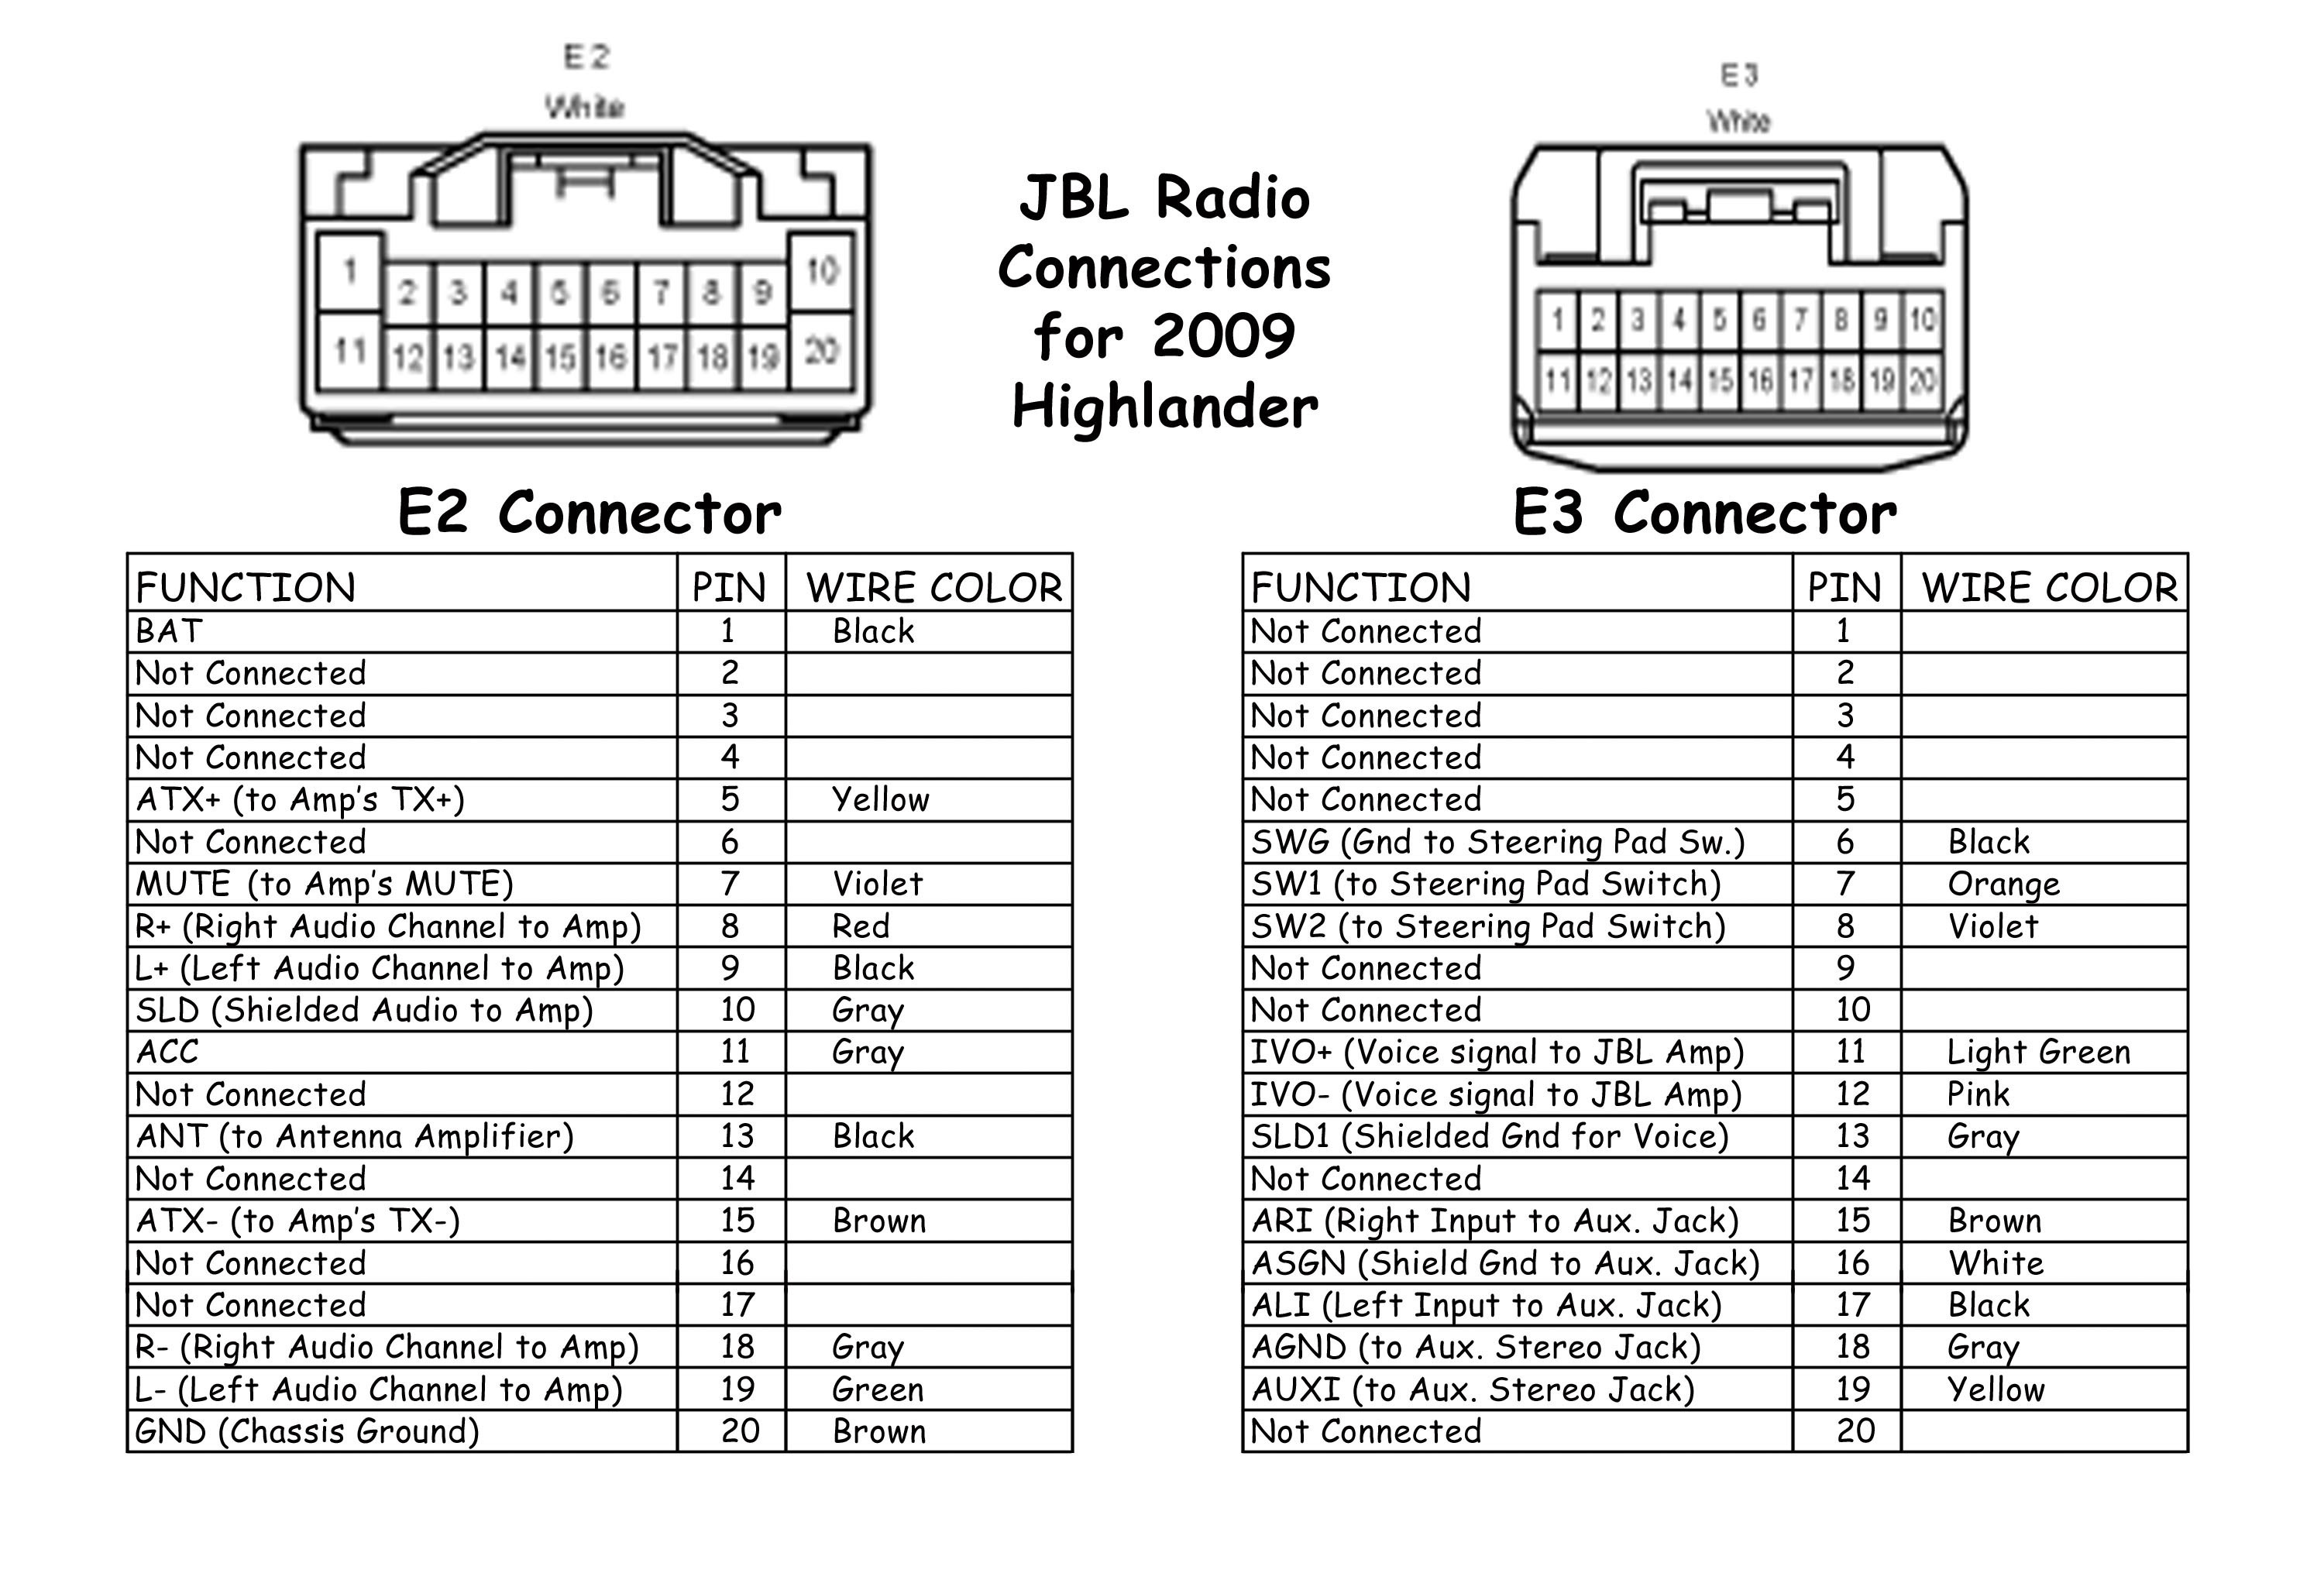 Toyota Avalon Engine Diagram Radio Wiring Diagrams Color Code Sequoia Hitch Wiring Diagram Of Toyota Avalon Engine Diagram